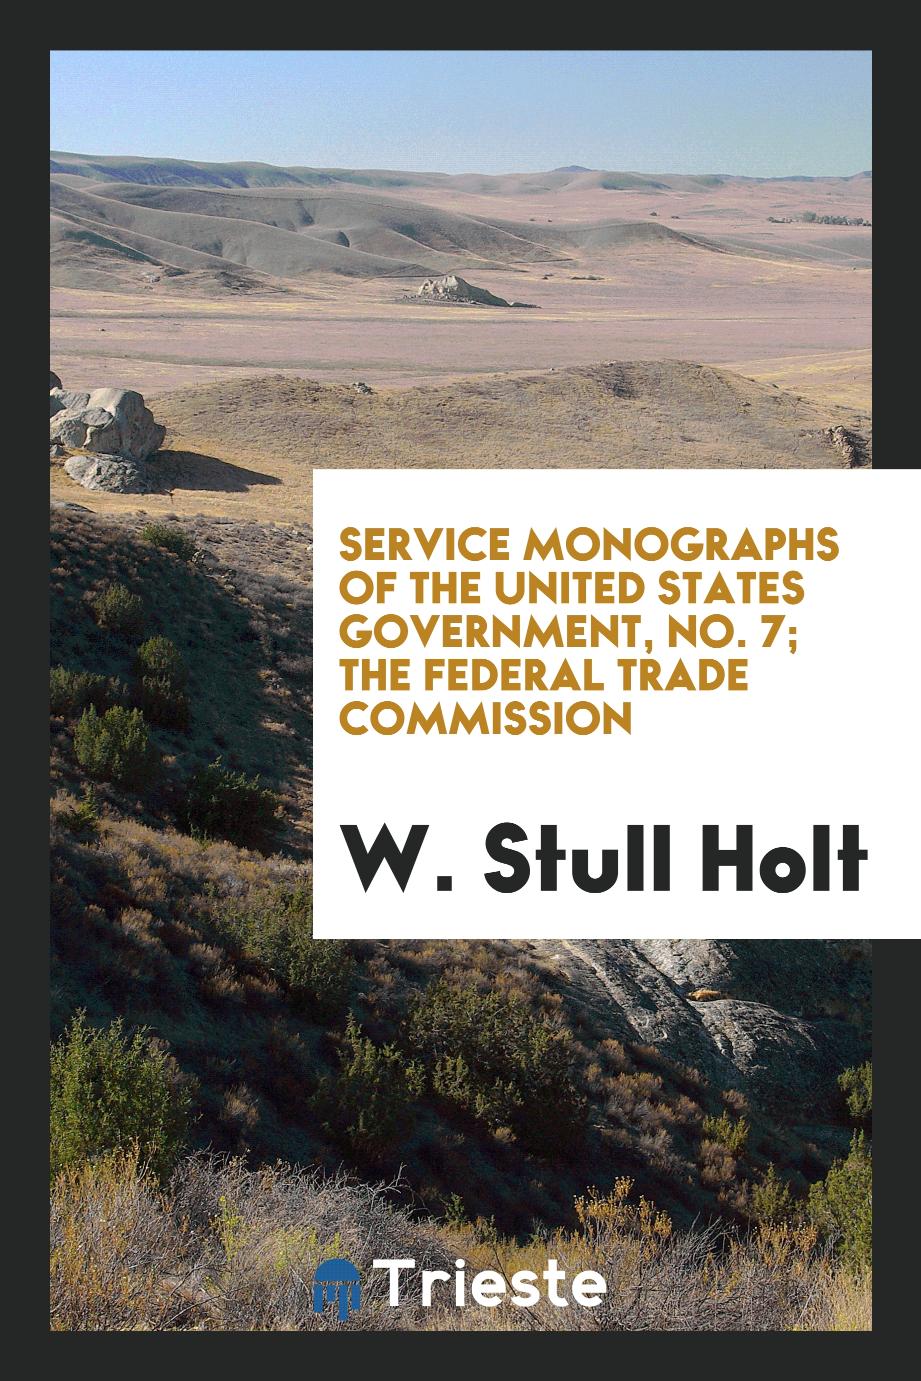 Service Monographs of the United States Government, No. 7; The Federal Trade Commission